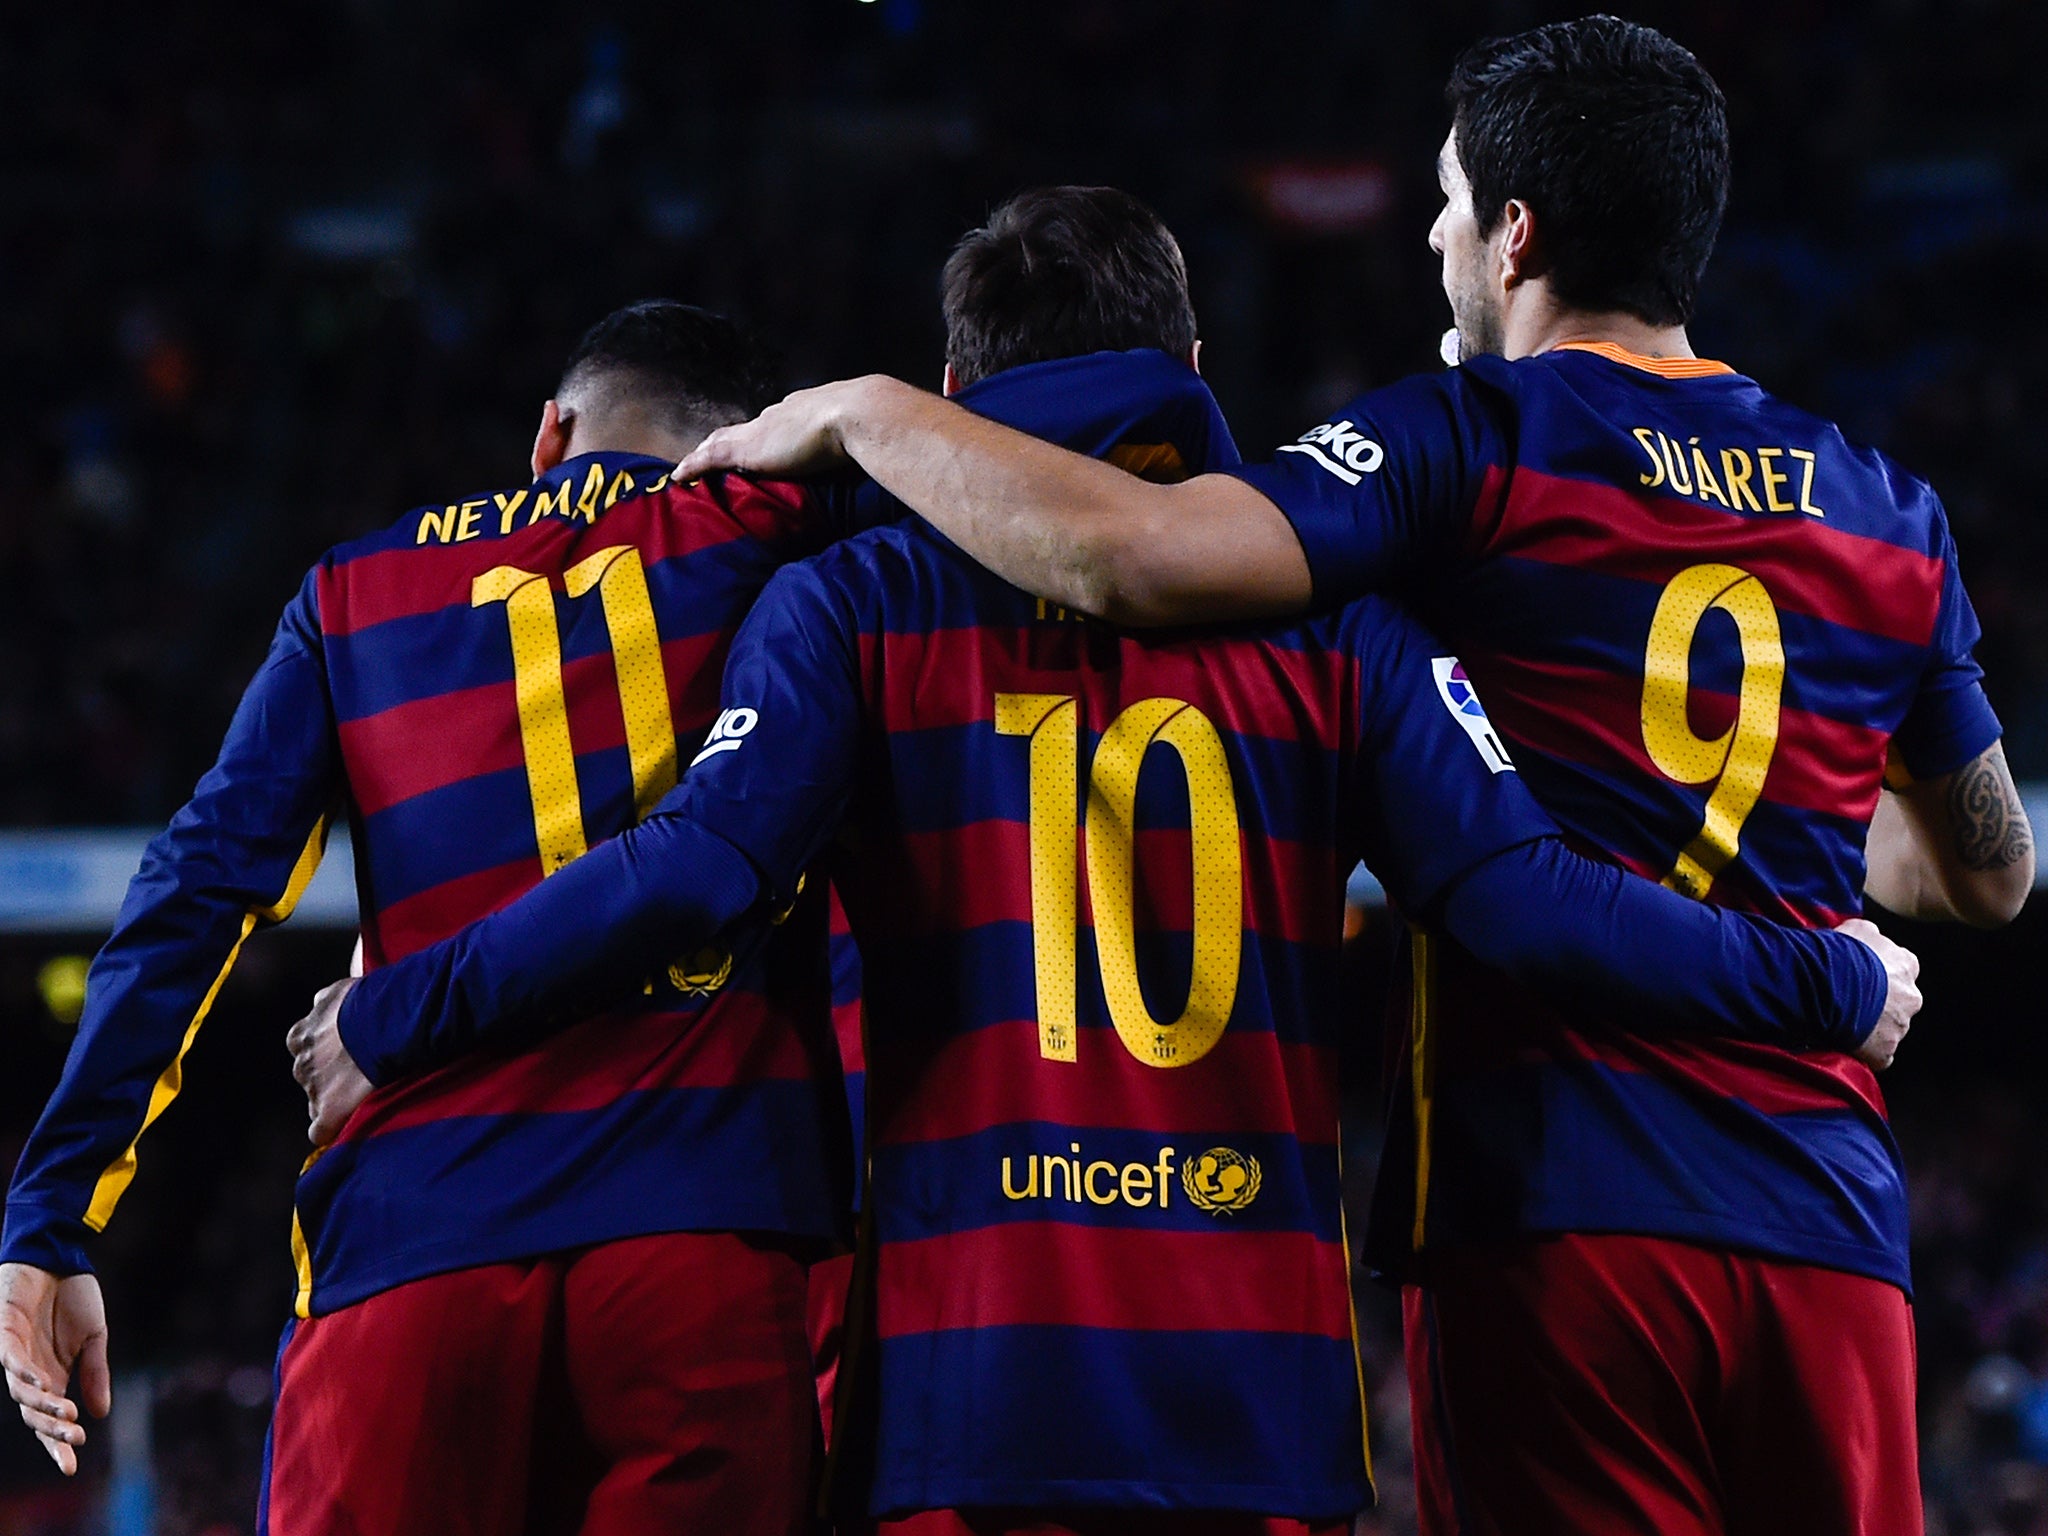 Barcelona's attacking trident of Lionel Messi, Luis Suarez and Neymar